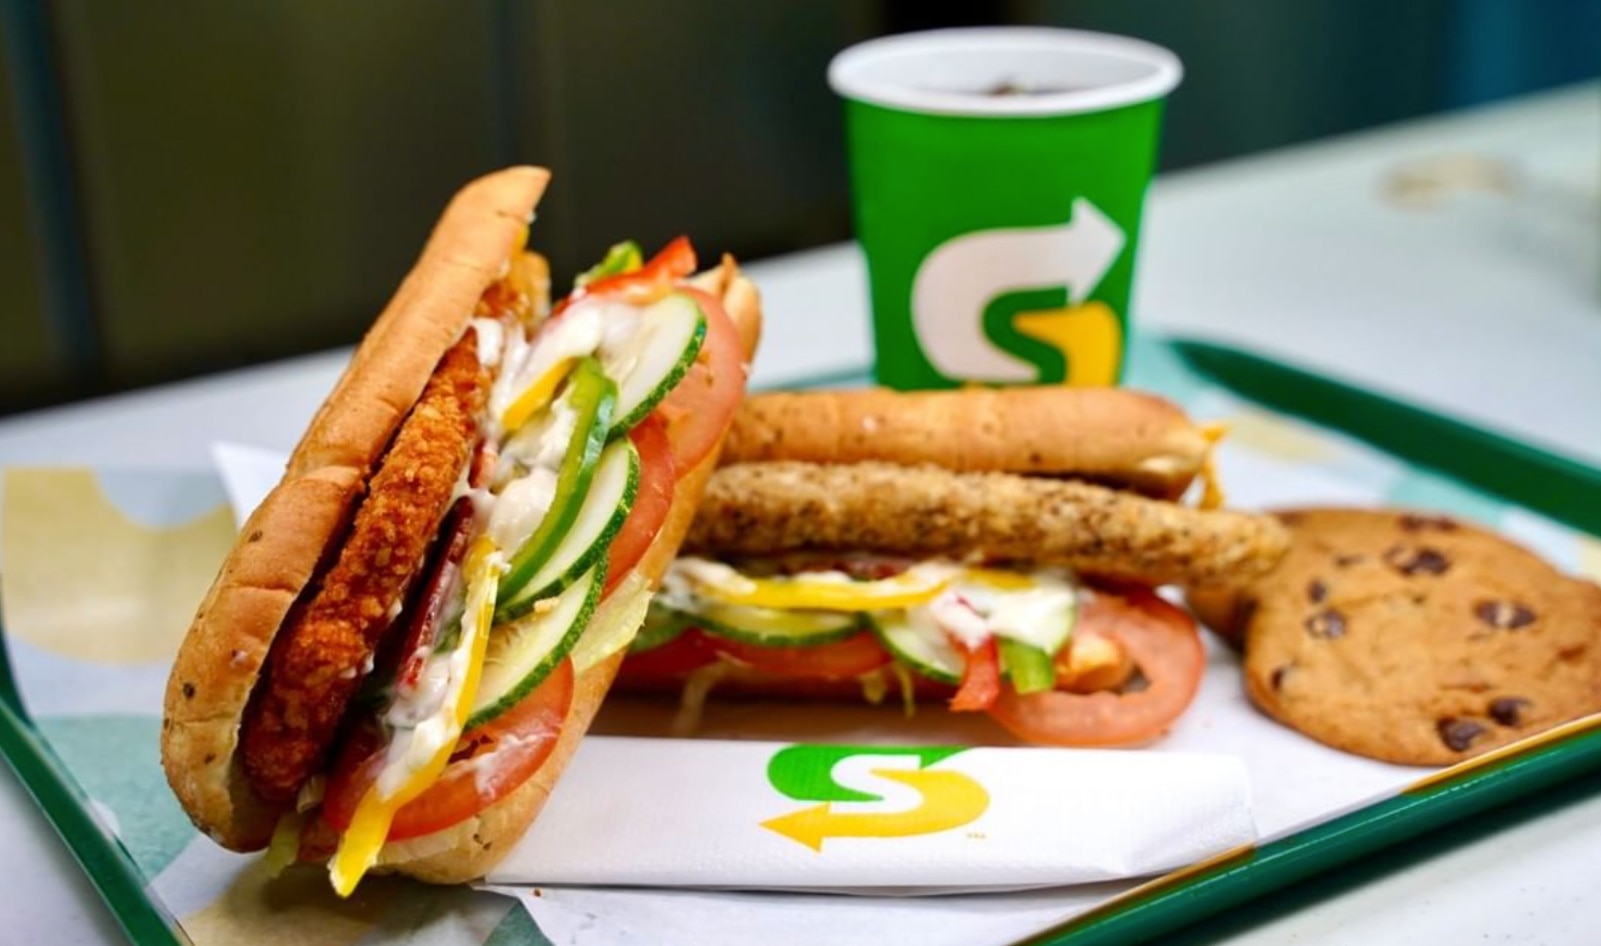 Subway Just Launched Meatless Chicken Schnitzel Sandwiches in Singapore